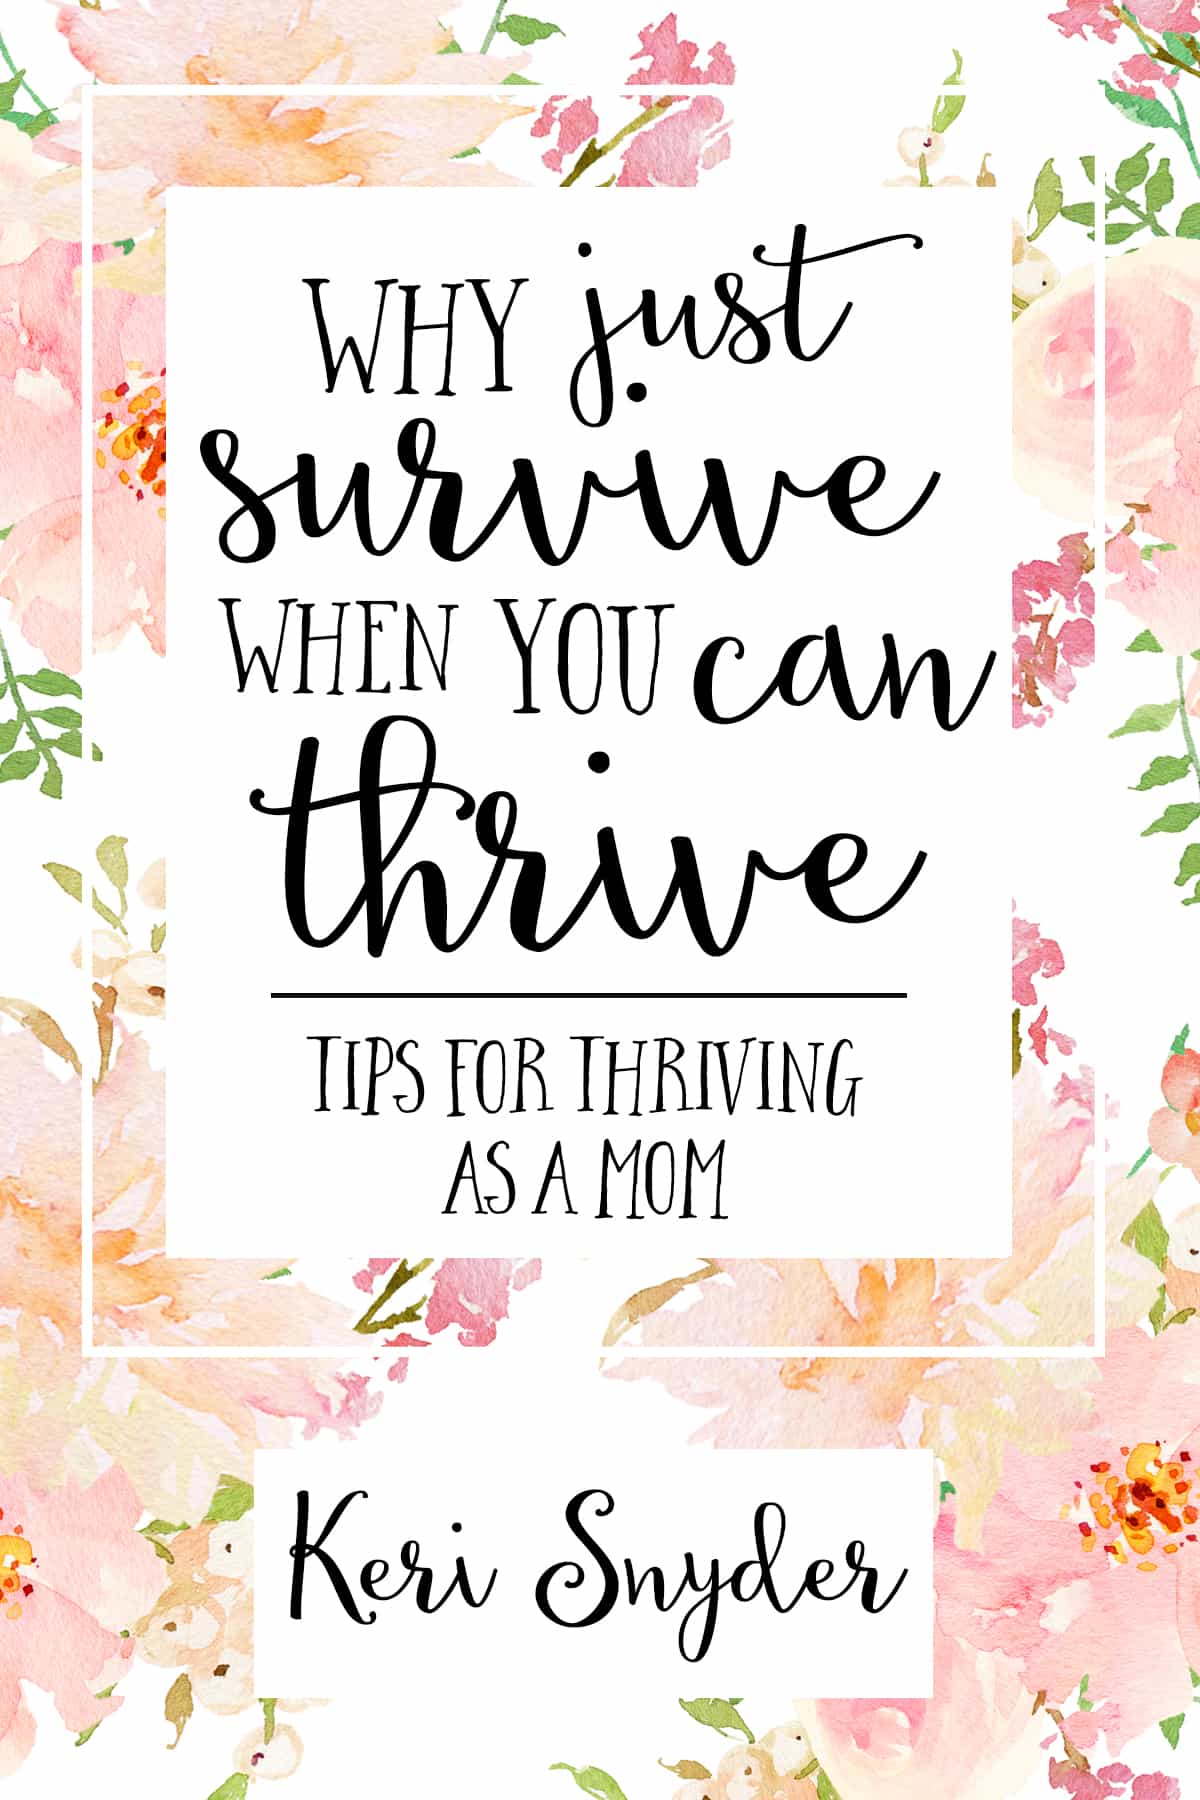 Why Just Survive When You Can Thrive. A Book Review.